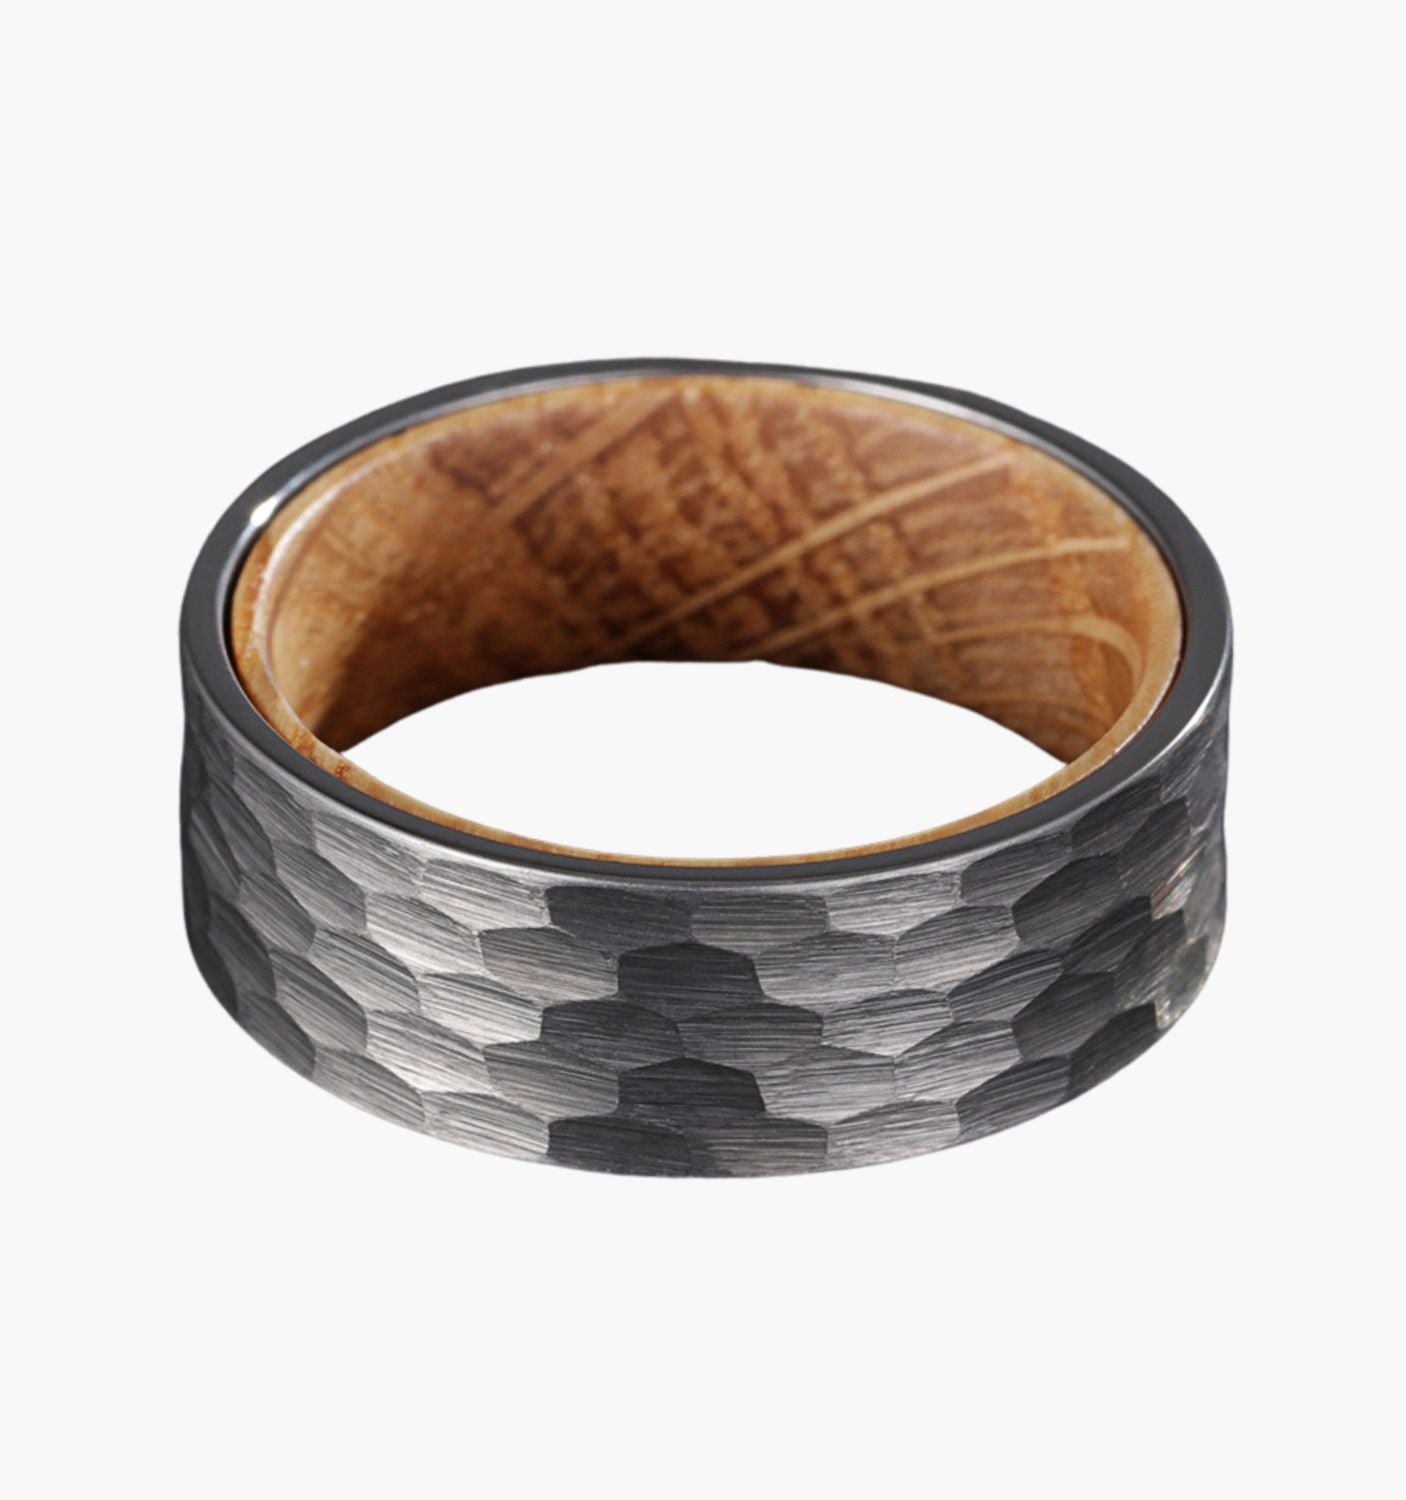 Hammered Gray and Wood Men's Wedding Ring